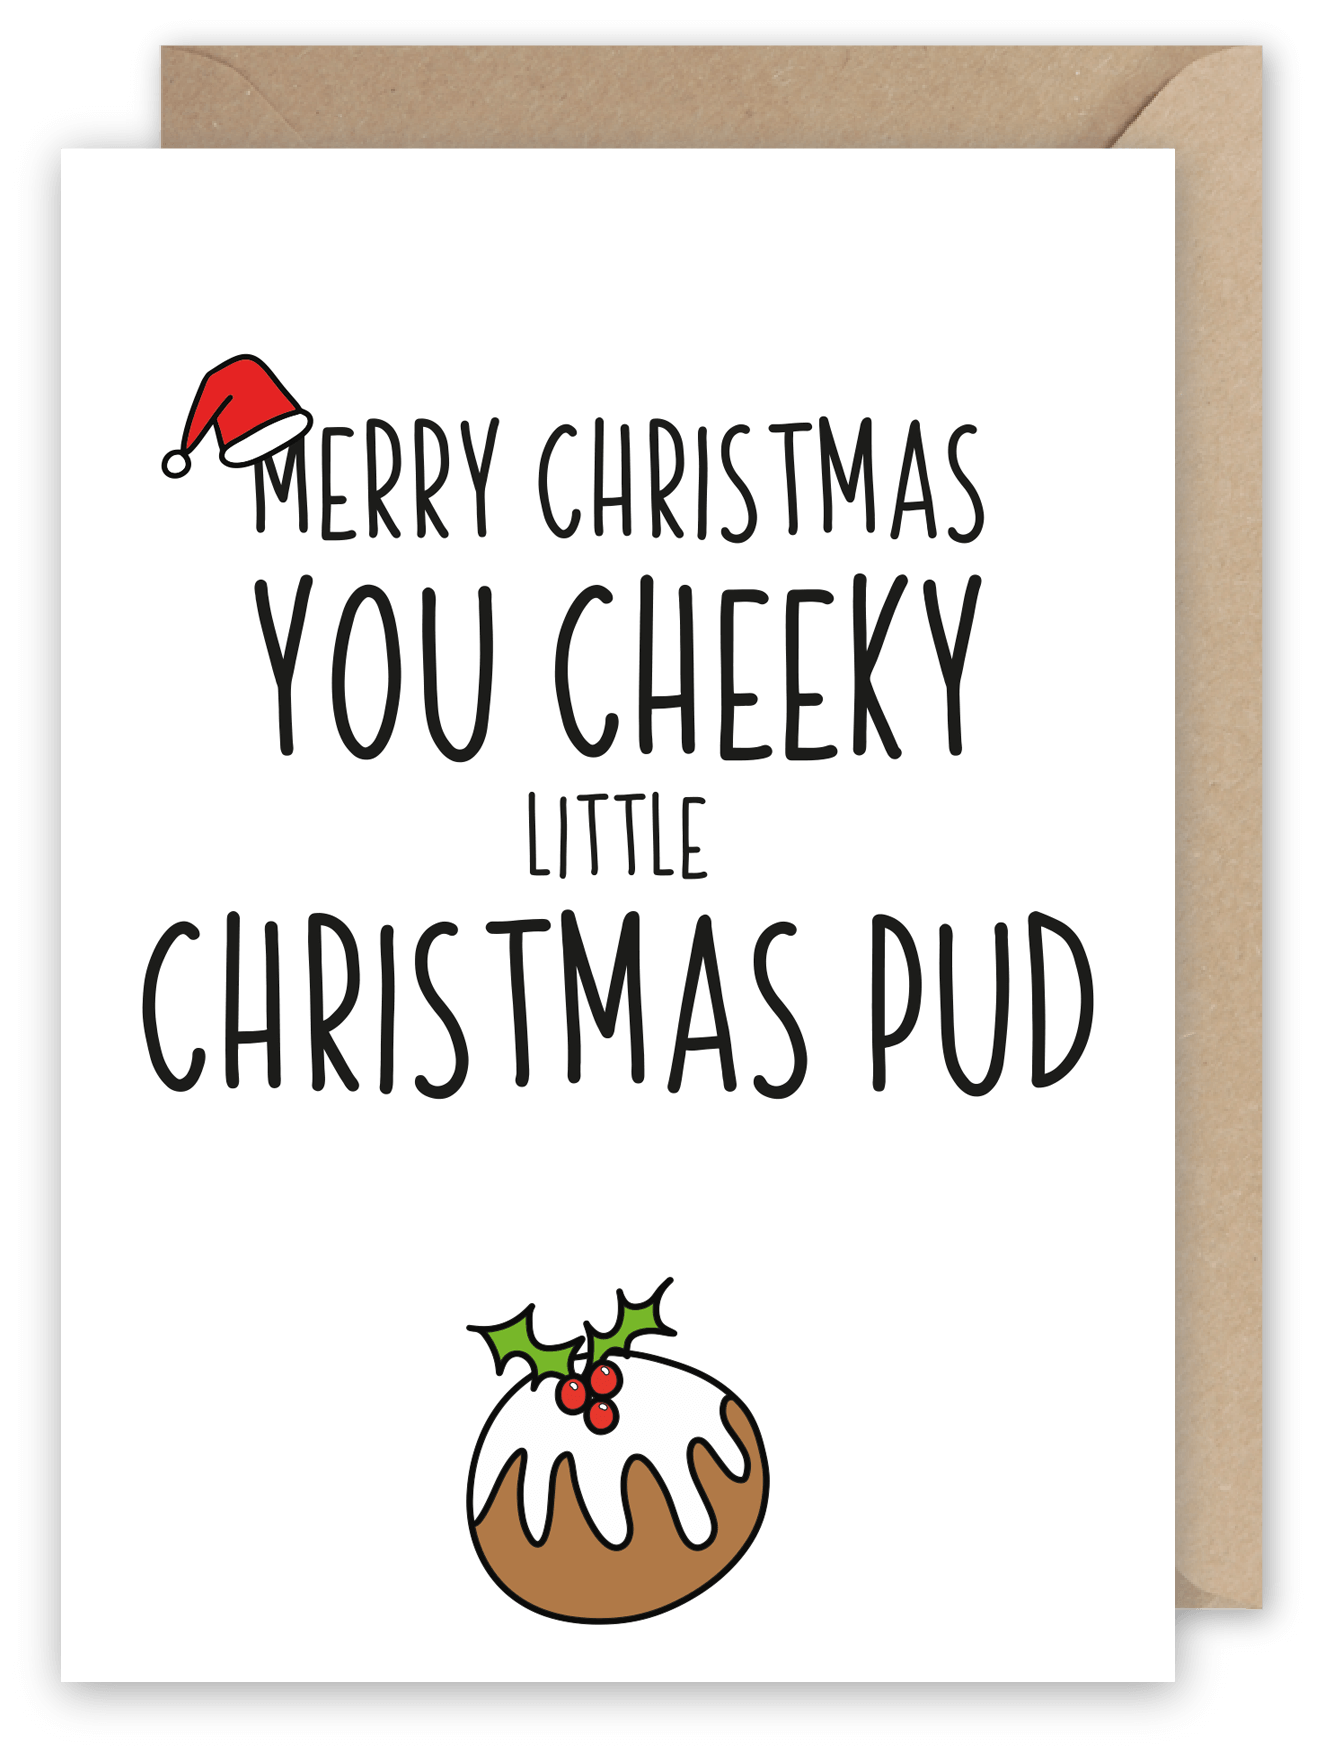 Merry Christmas You Cheeky Little Christmas Pud - Greeting Card from ...